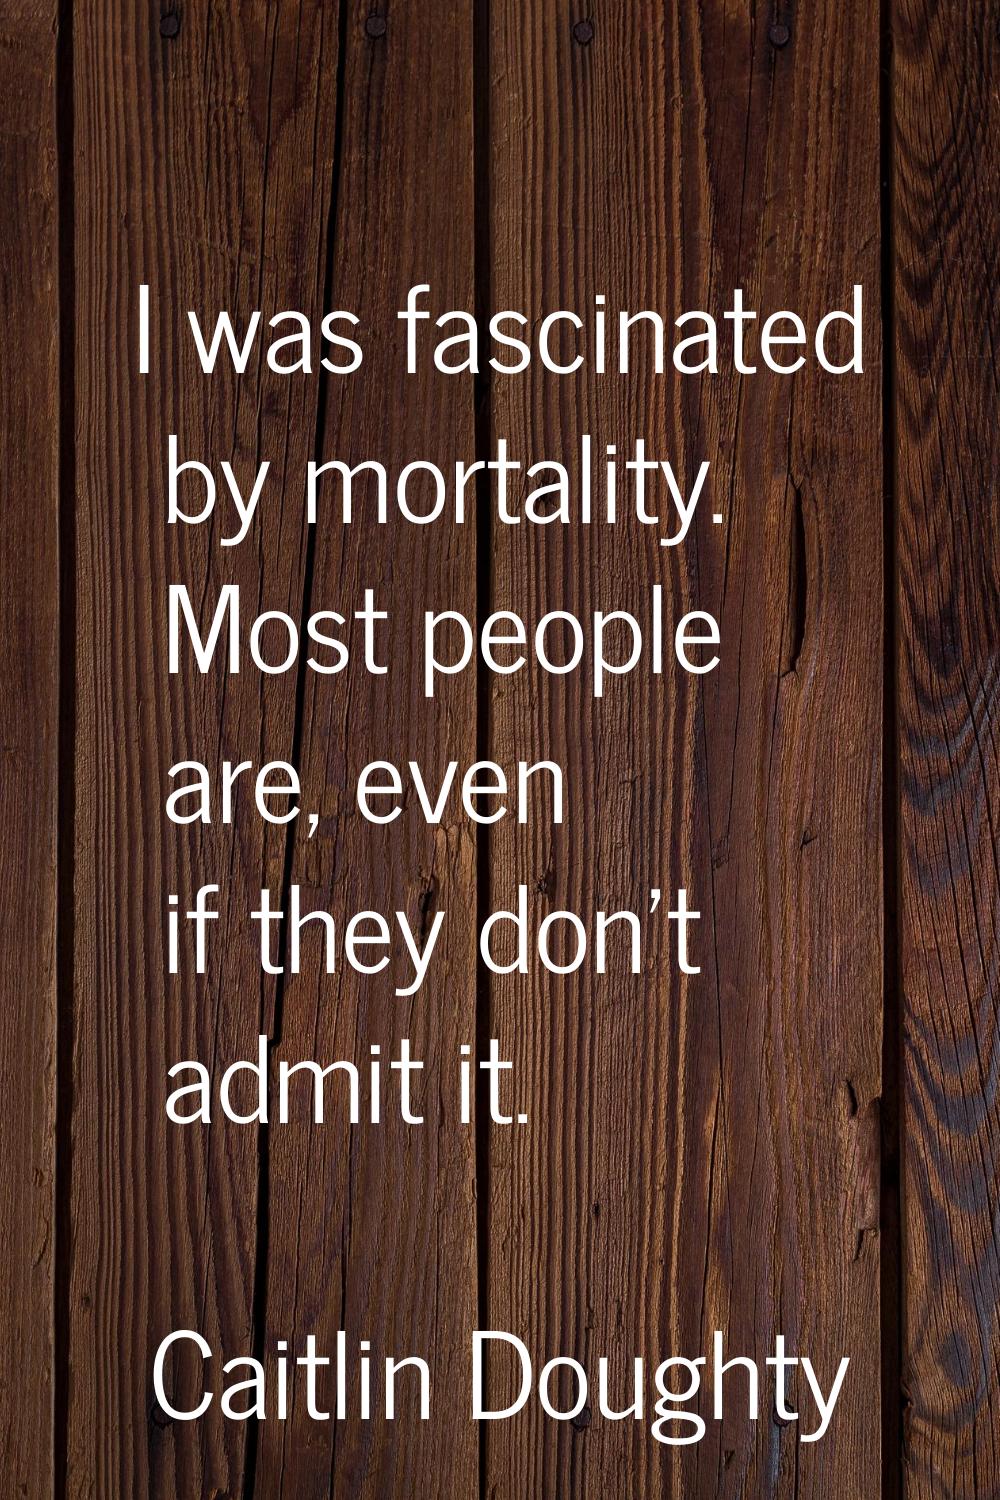 I was fascinated by mortality. Most people are, even if they don't admit it.